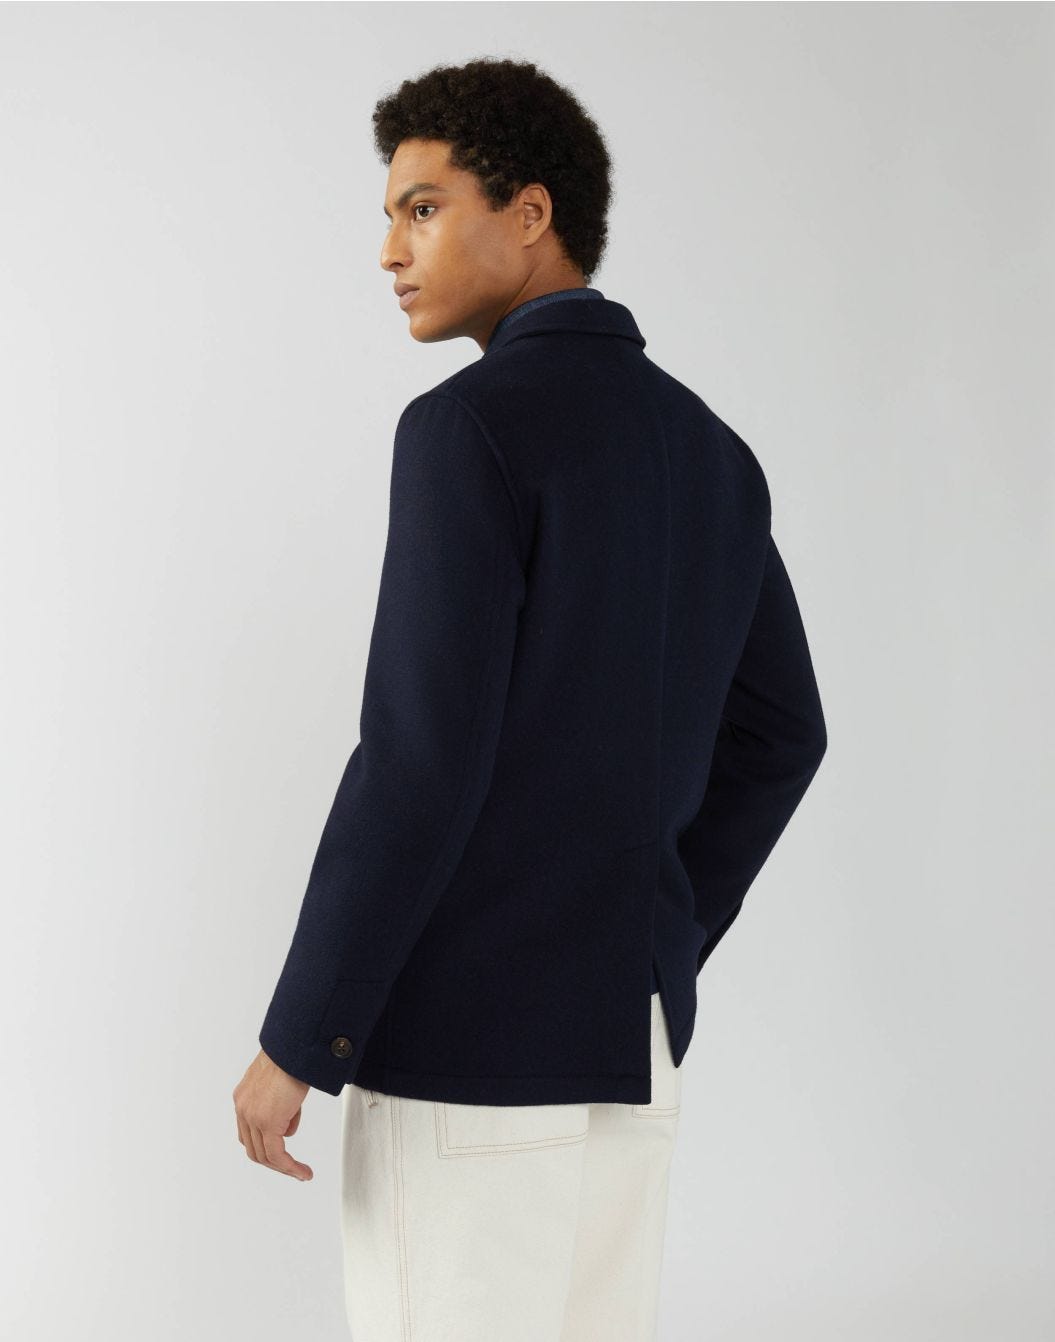 Blue shirt jacket in wool, cashmere and silk